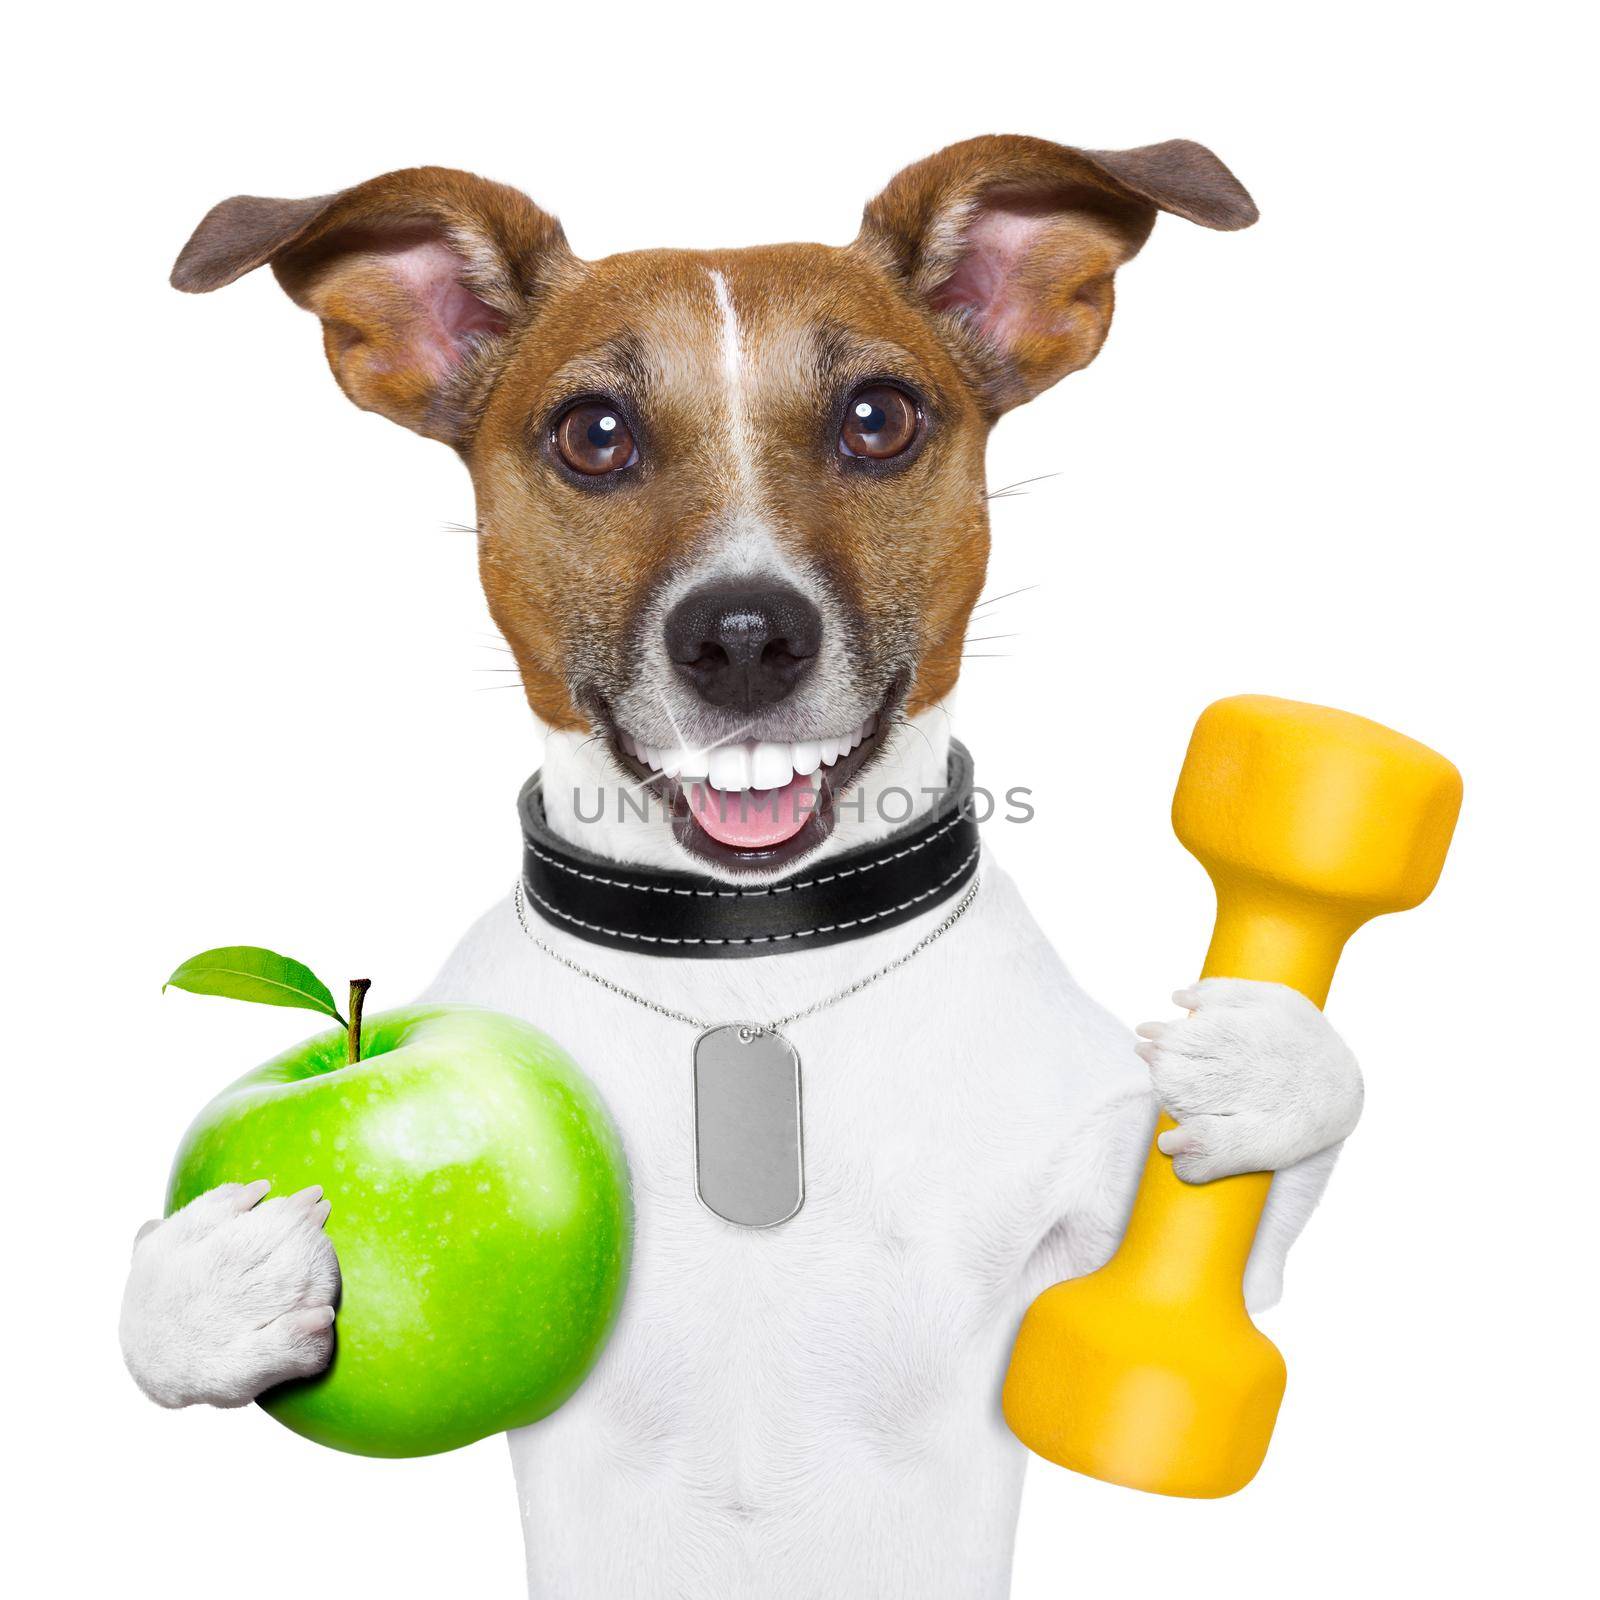 healthy dog with a big smile and a green apple